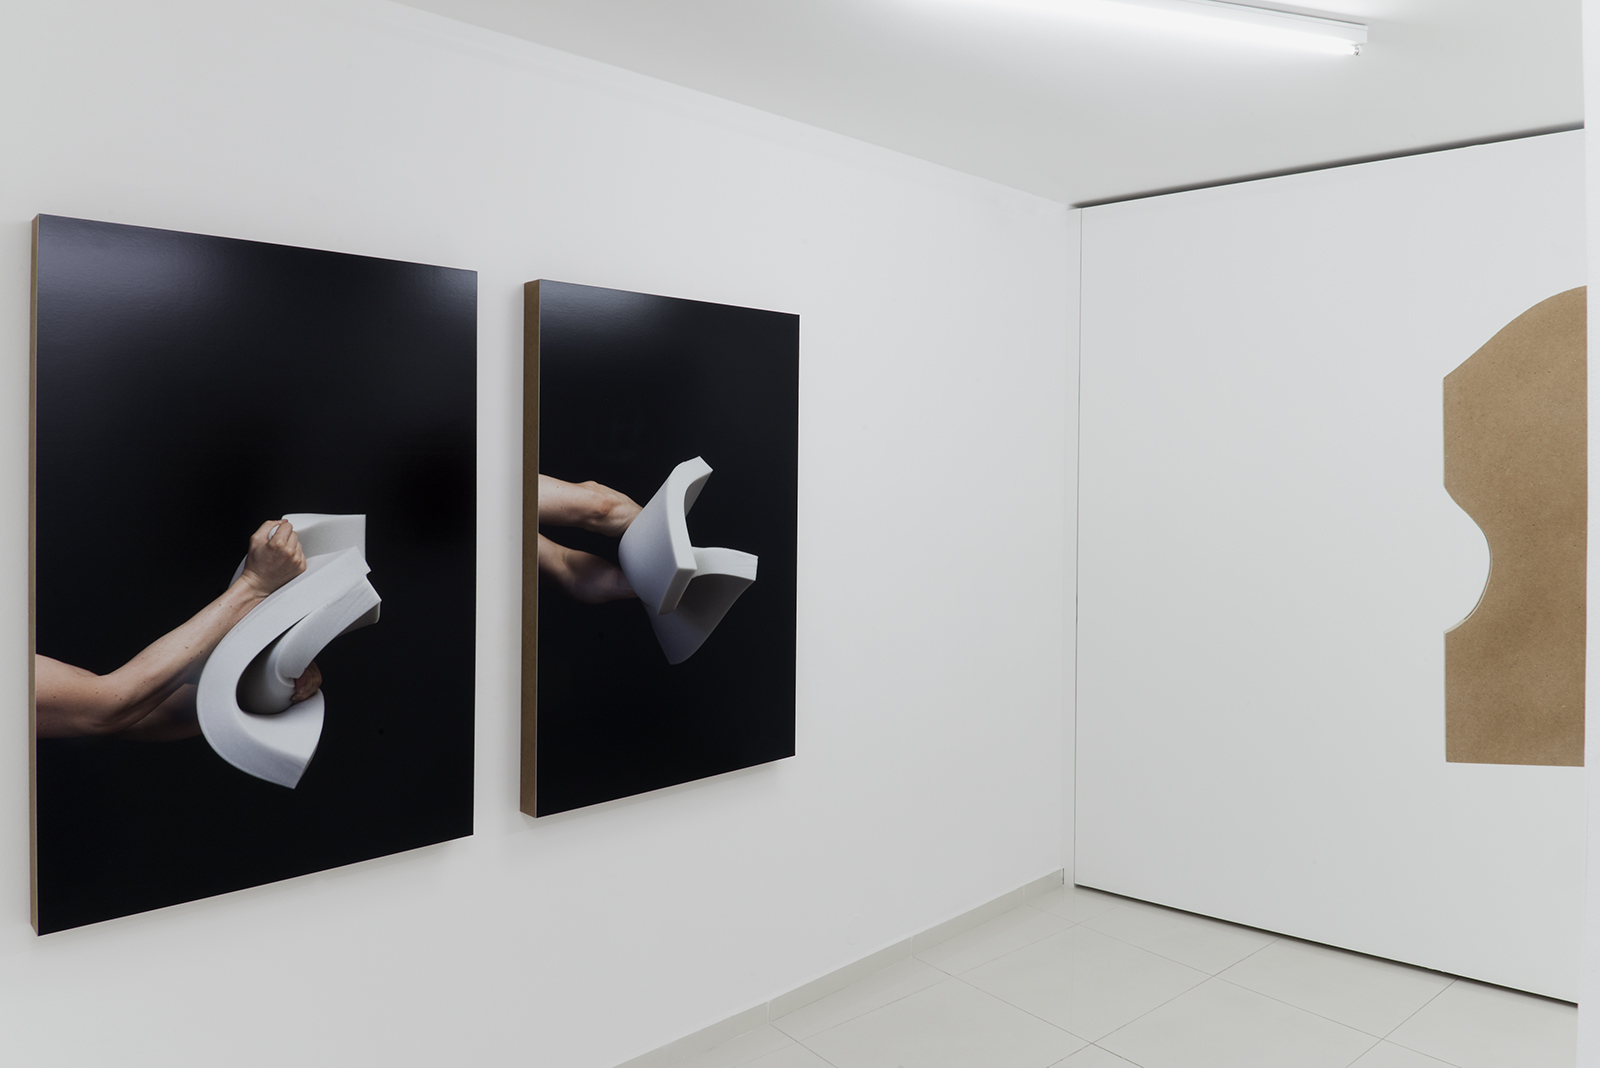 Hands Clasped 2015, installation view, digital c-print on wooden box, FAIT Gallery, Brno